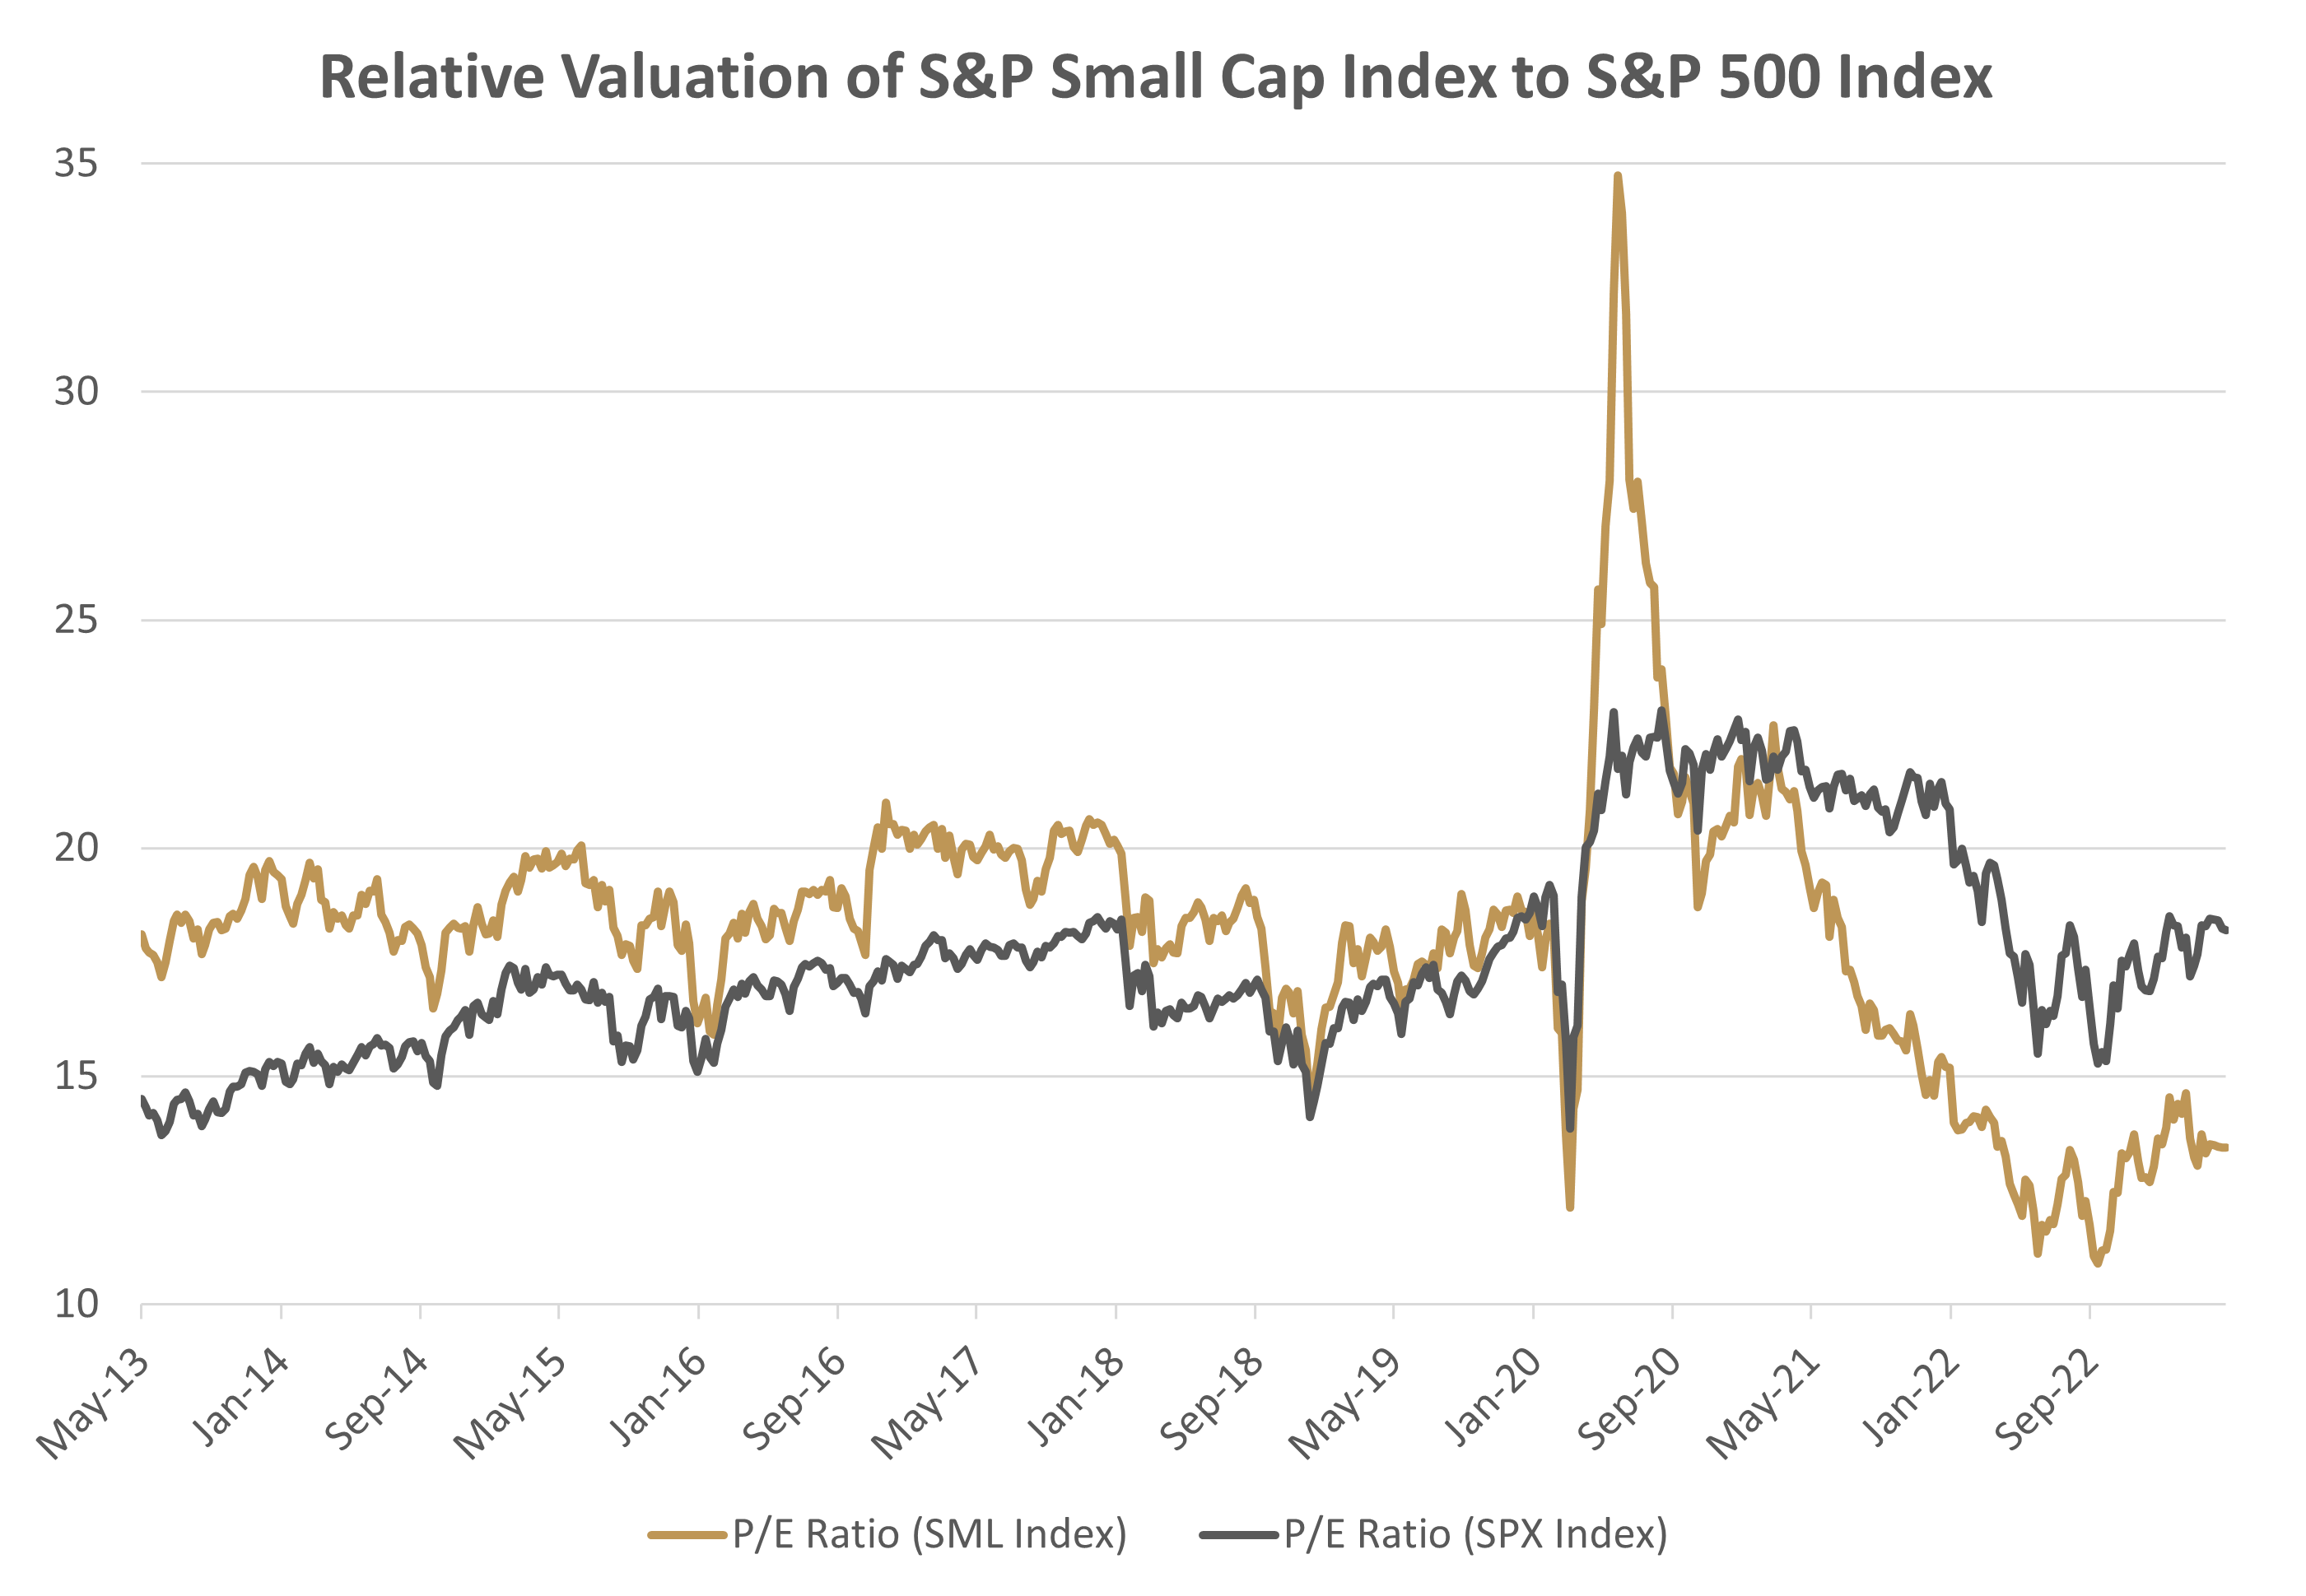 Relative Valuation of S&P Small Cap Index to S&P 500 Index